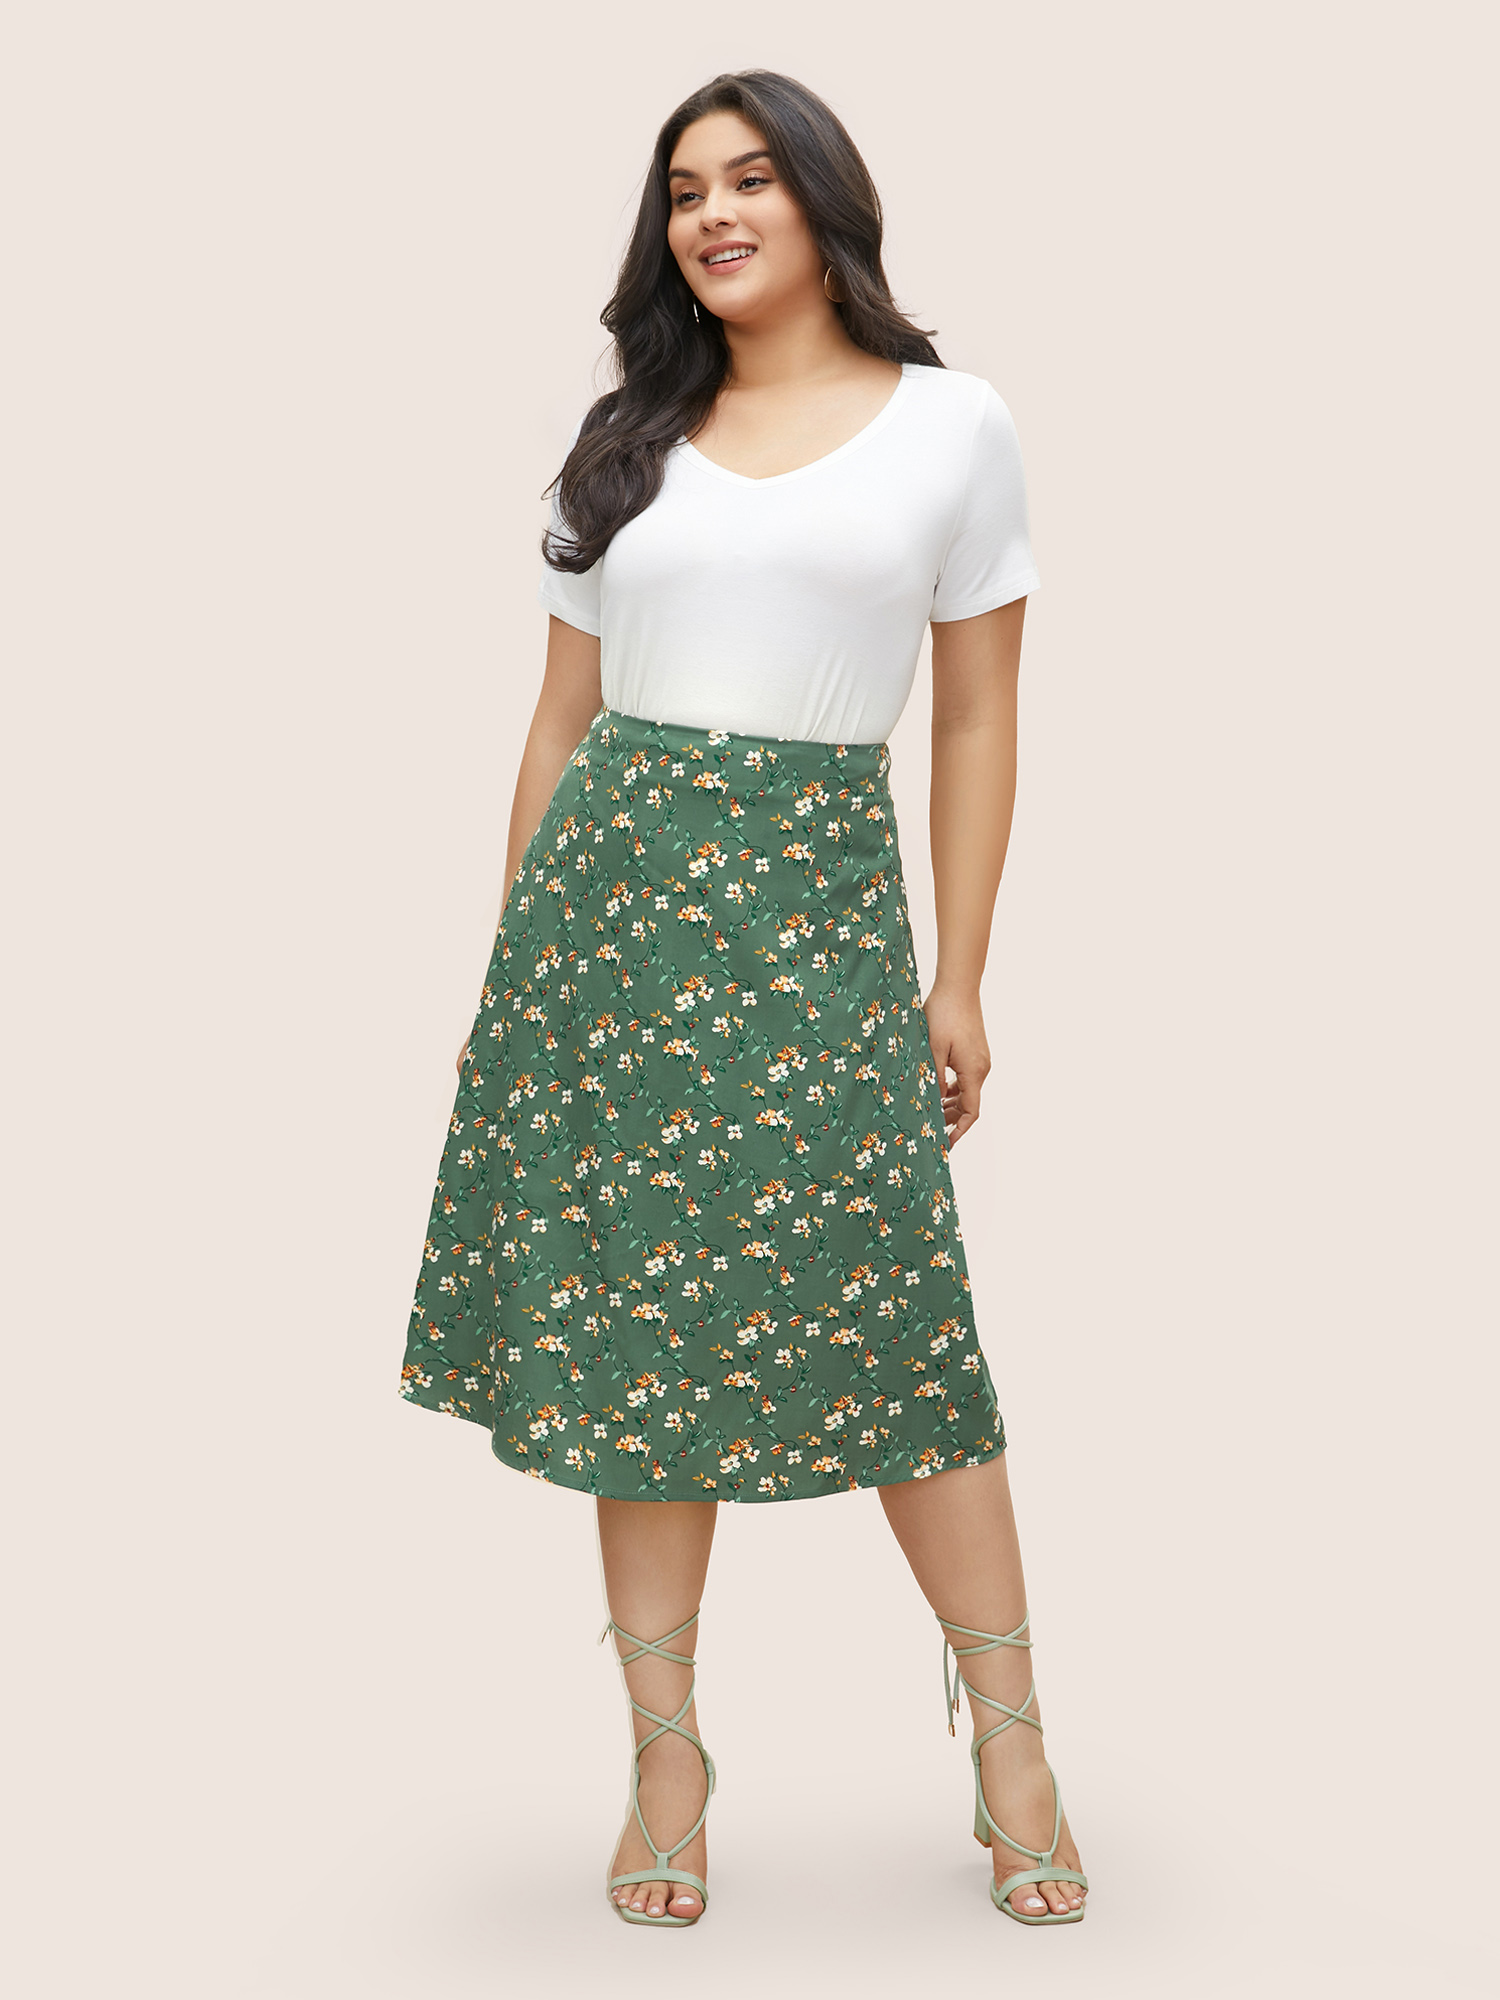 

Plus Size Ditsy Floral Print Zipper Fly Cropped Skirt Women Mint Elegant Non No stretch Everyday Skirts BloomChic